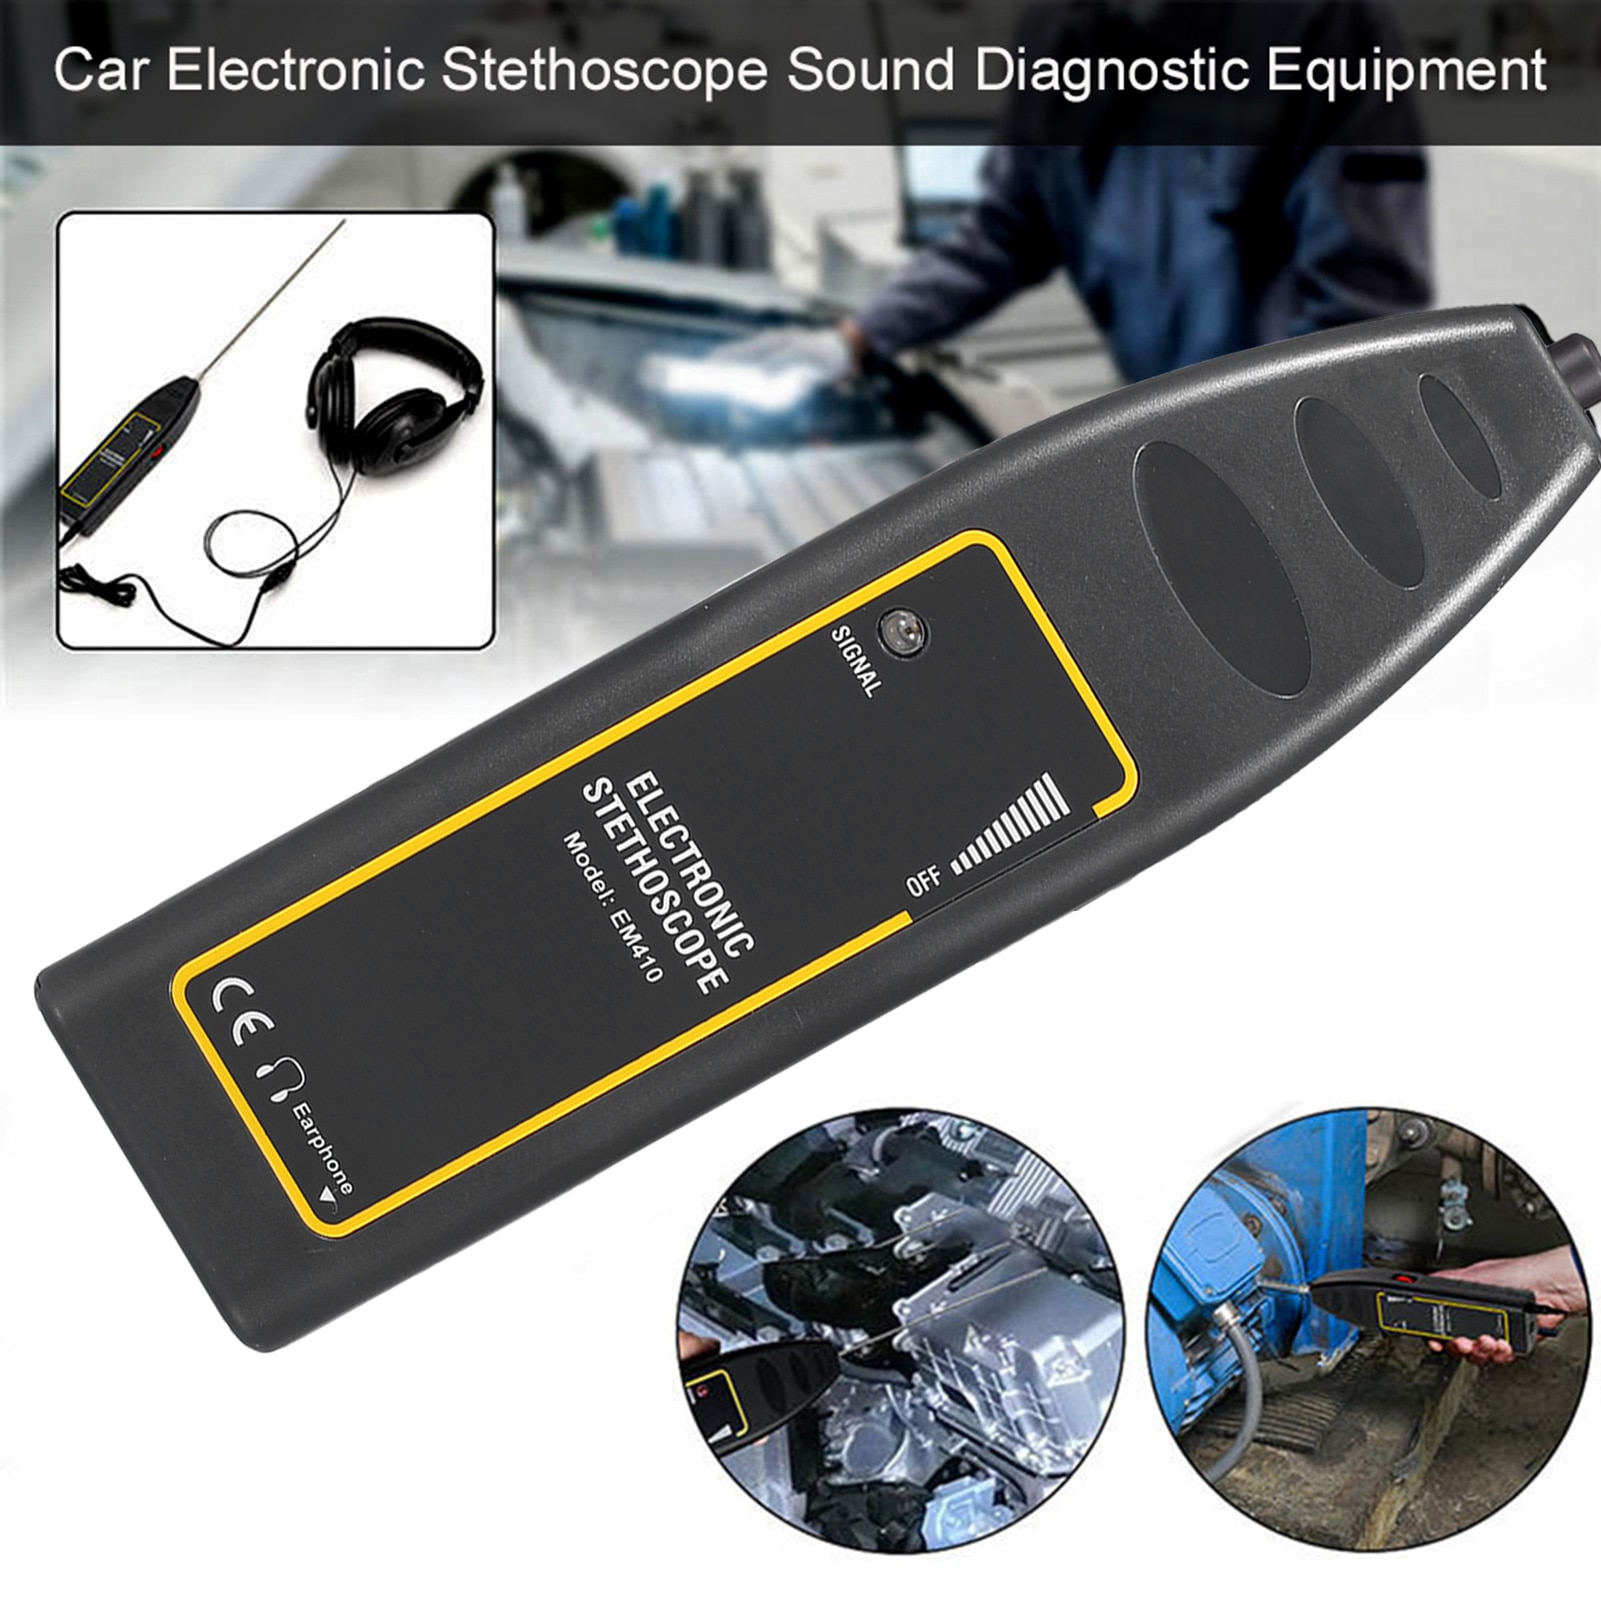 Car Electronic Stethoscope Sound Diagnostic Equipment Engine Repair Tool Abnormal Sound Detector Car Noise Finder